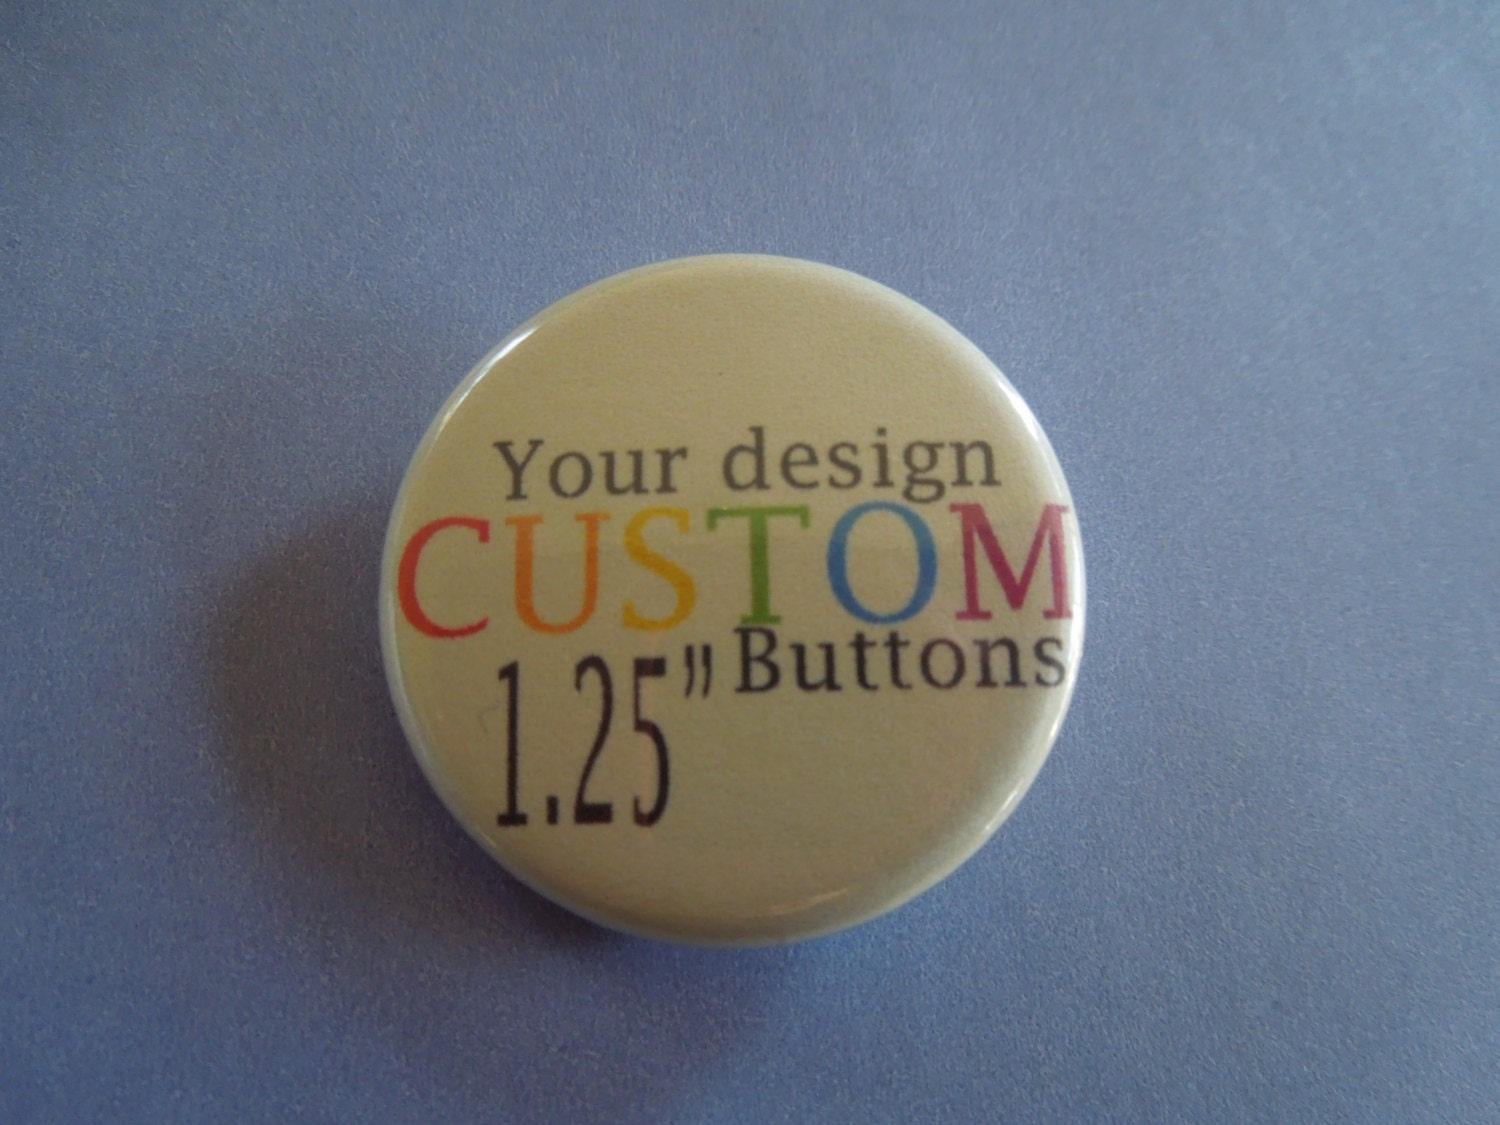 Funny Buttons And Stuff 50 Custom Pinback Buttons Pins Badges